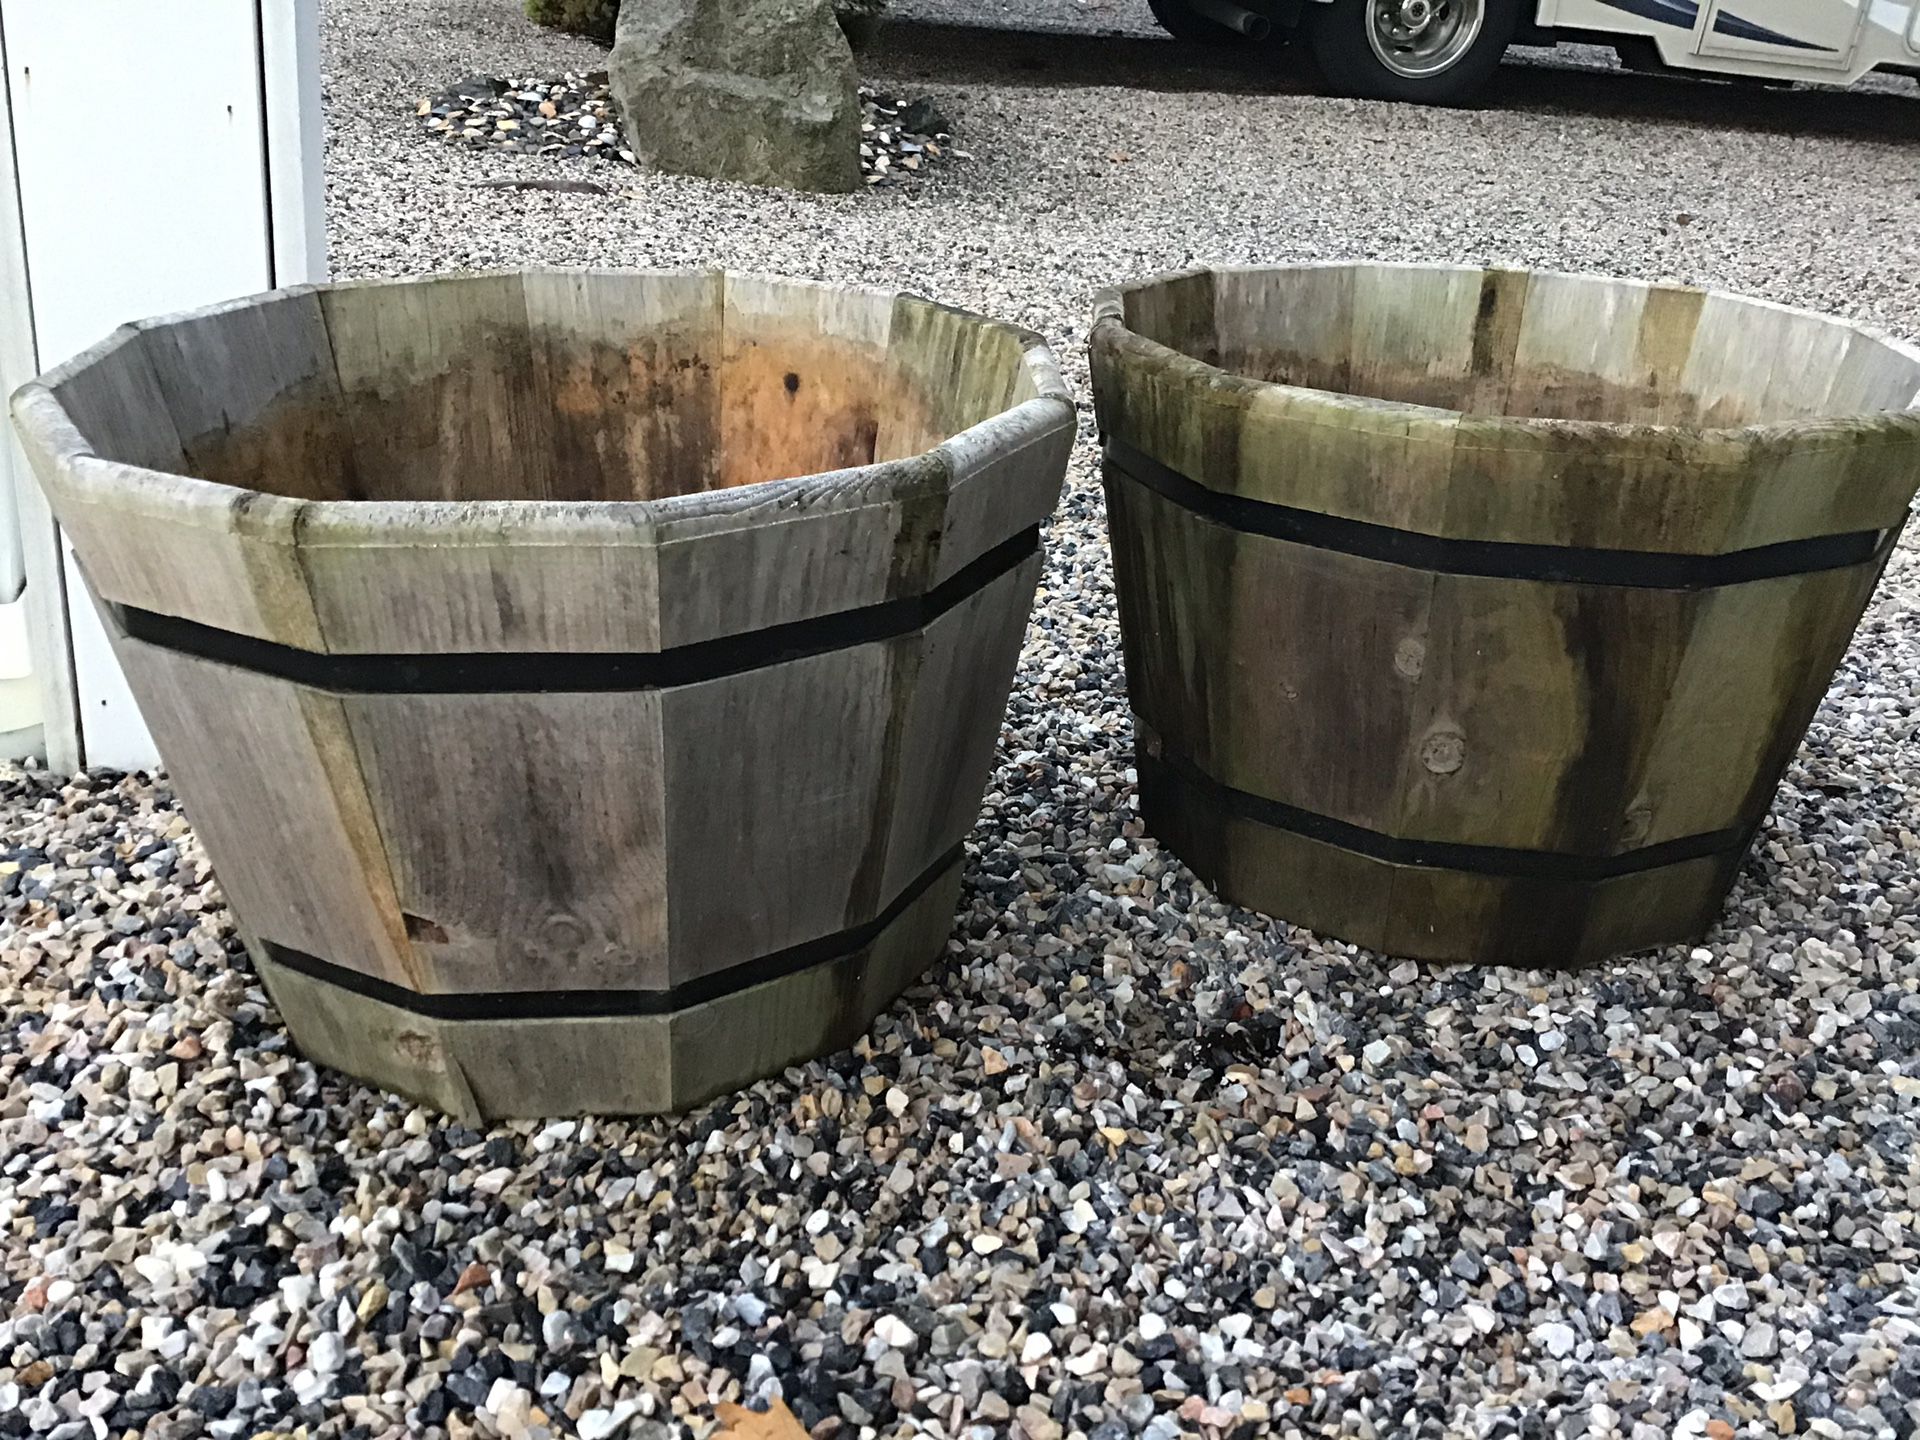 Set of two heavy, sturdy planters for trees or mums